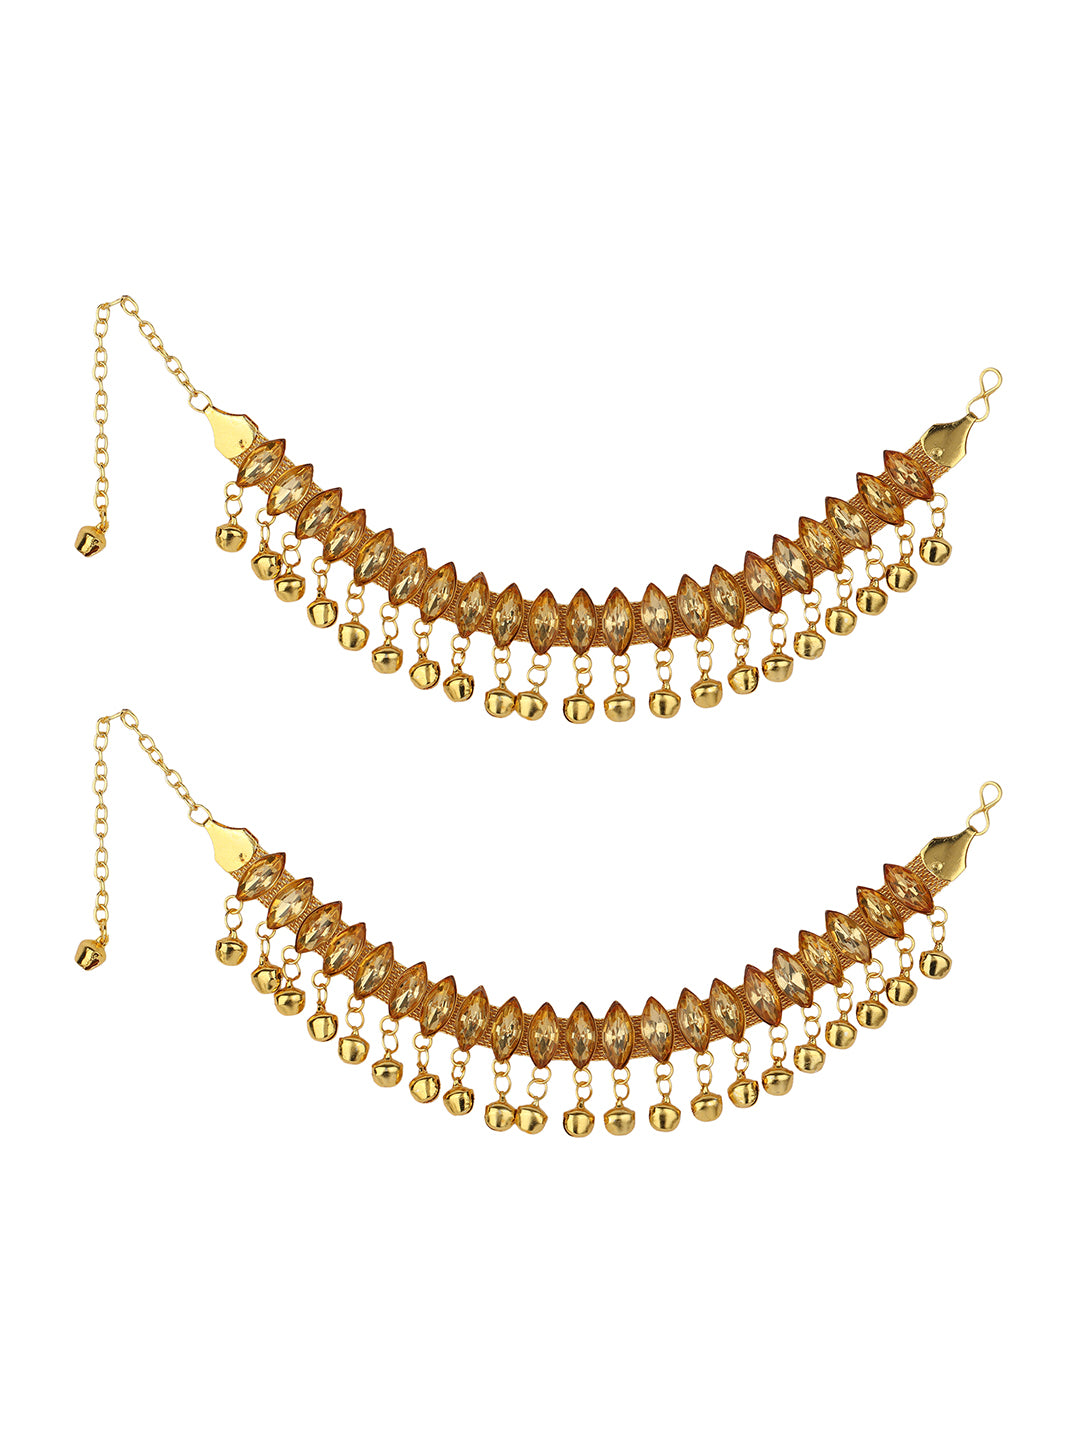 Women's Gold Plated Traditional Briday Kundan And Stone Studded Anklet/Payal - Anikas Creation